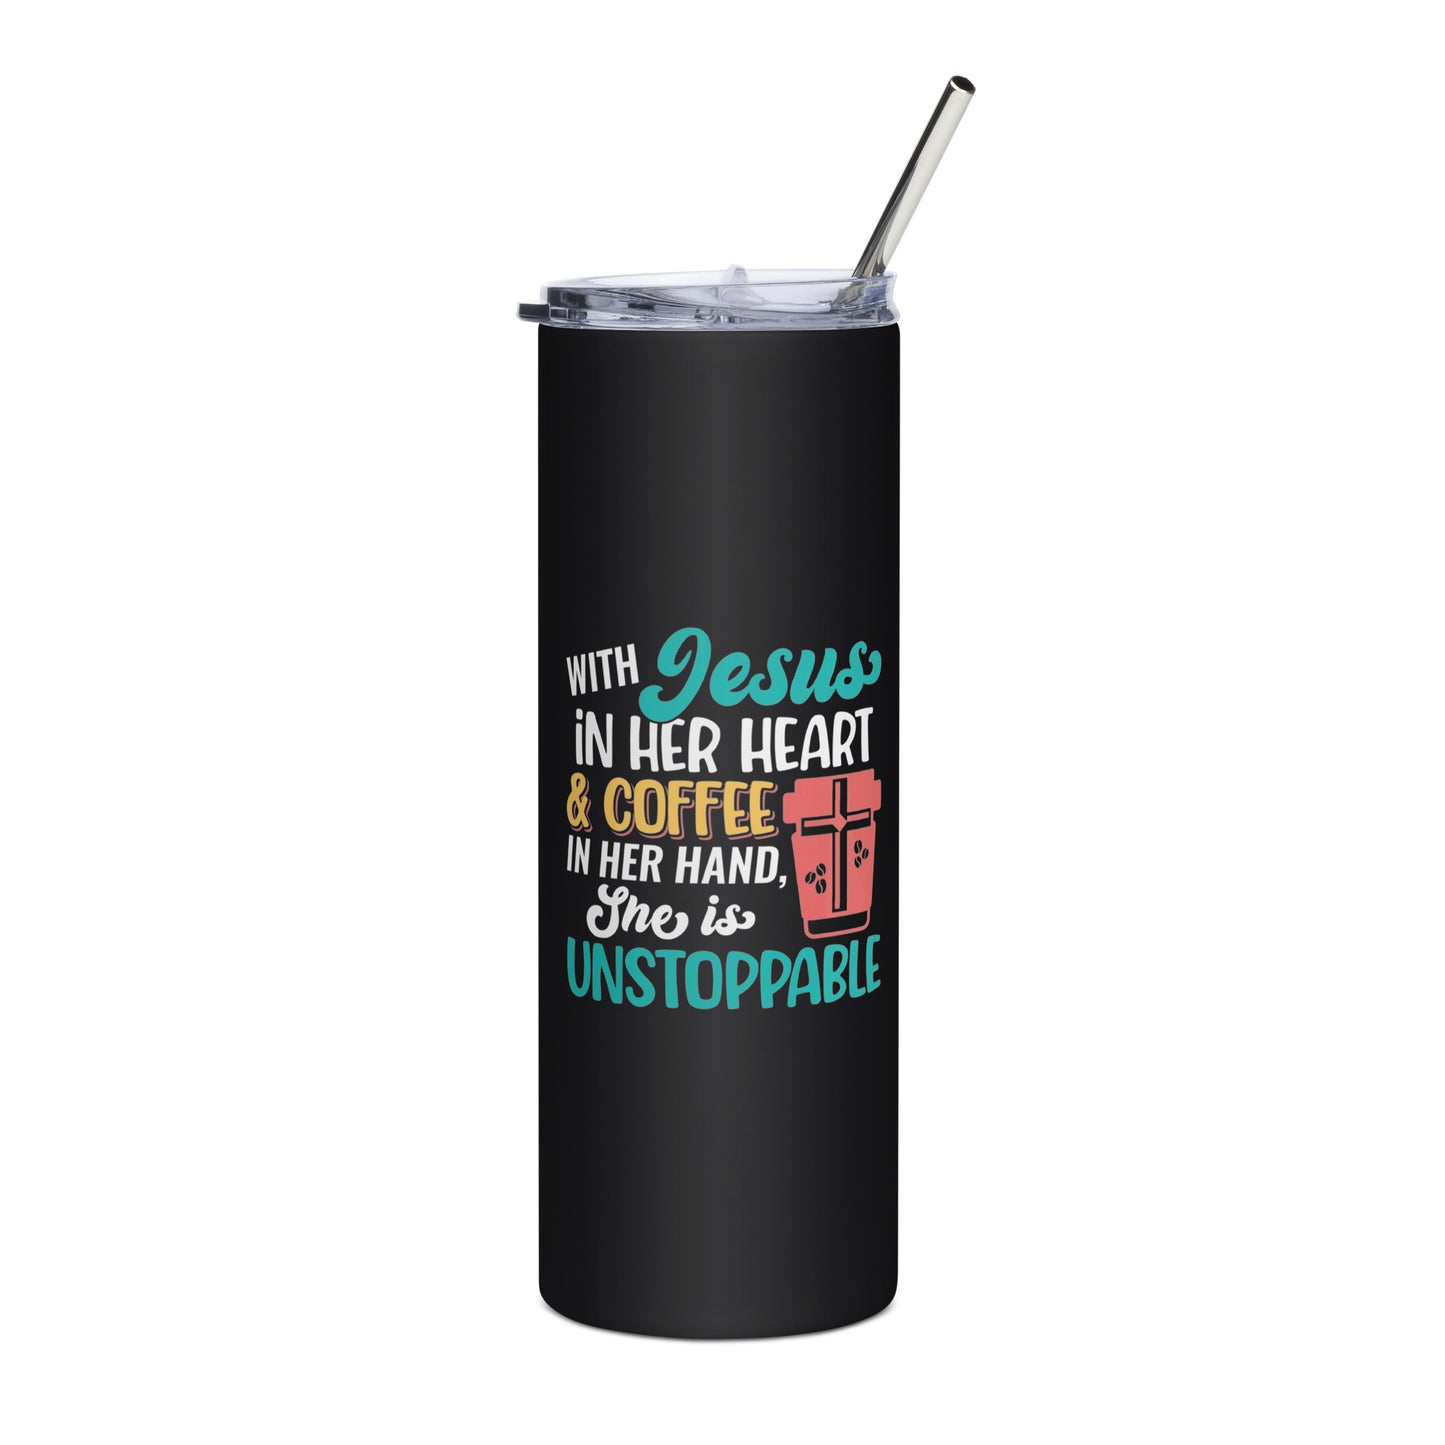 With Jesus in Her Heart & Coffee in Her Hand She is Unstoppable Stainless steel tumbler